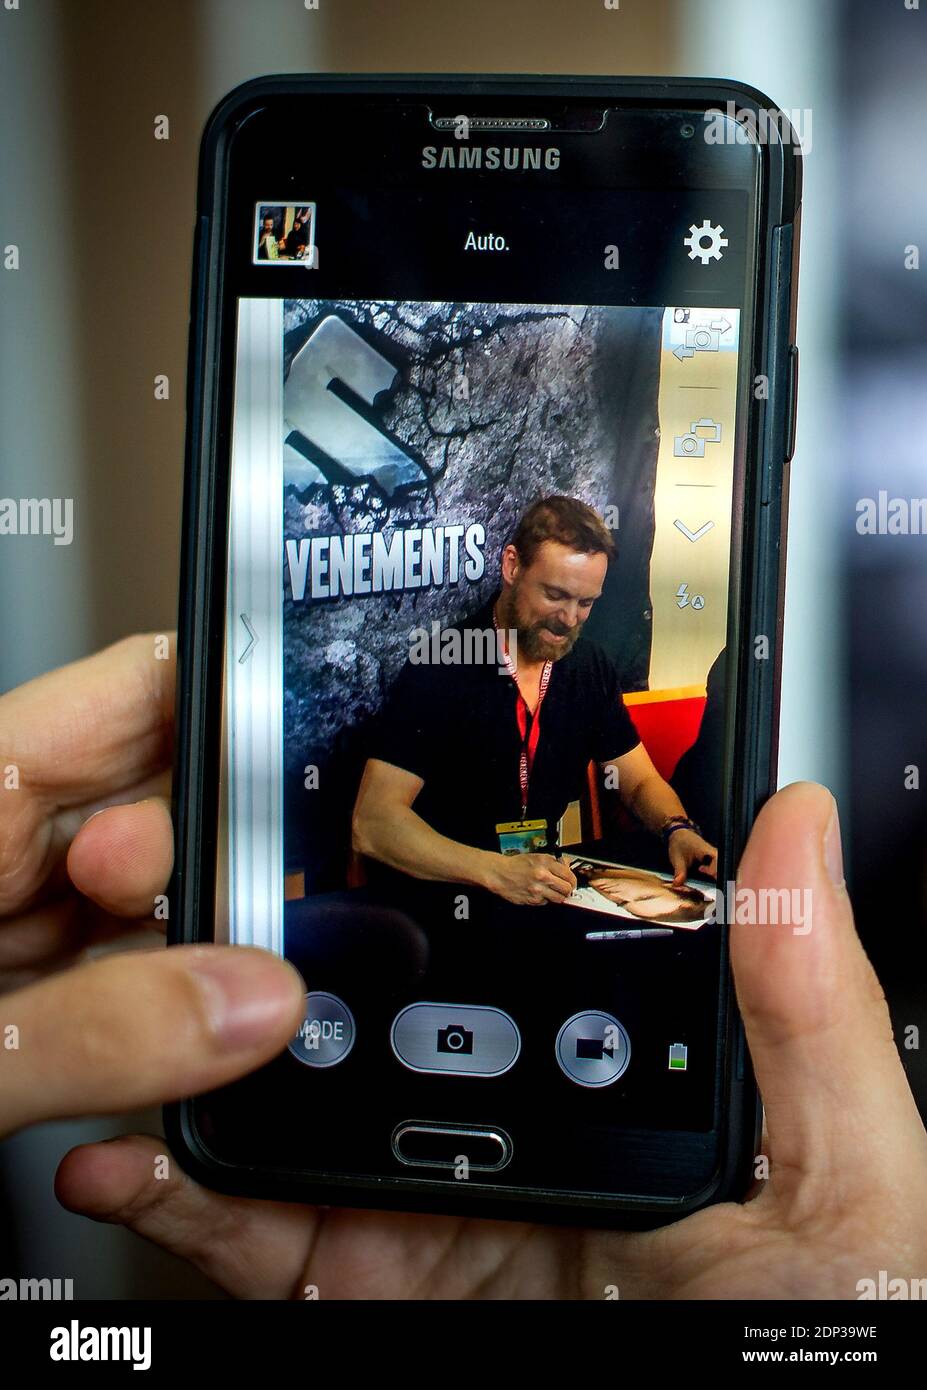 US actor Michael Shanks meets fans during the Toulouse Game Show in Toulouse, France on April 5, 2015. Photo by Bernard-Marie/ABACAPRESS;COM Stock Photo